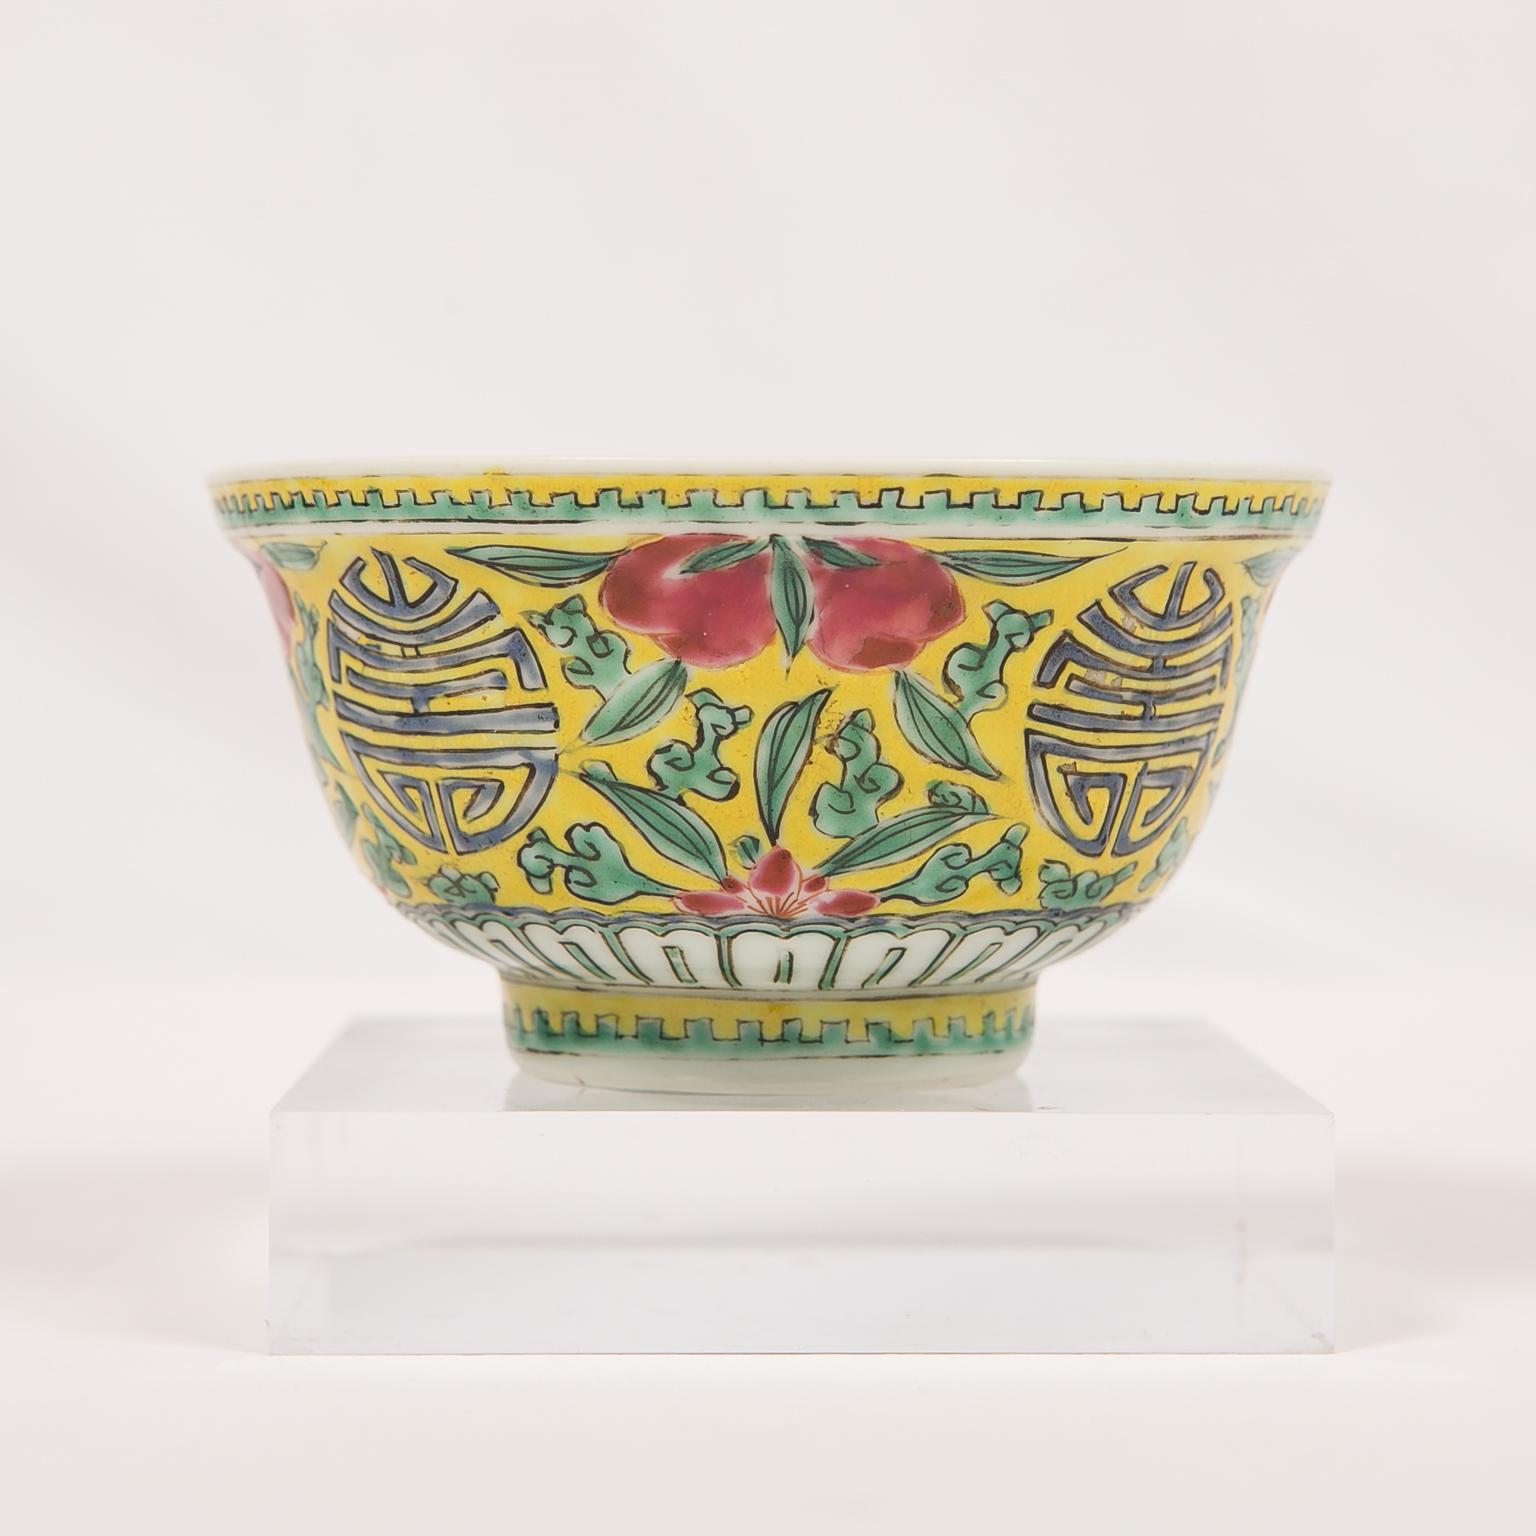 We are delighted to offer this small gem of Chinese porcelain art. 
Made late in the Qing Dynasty in the late 19th century this bowl is decorated on the exterior with vegetation, flowers, and the Chinese character 